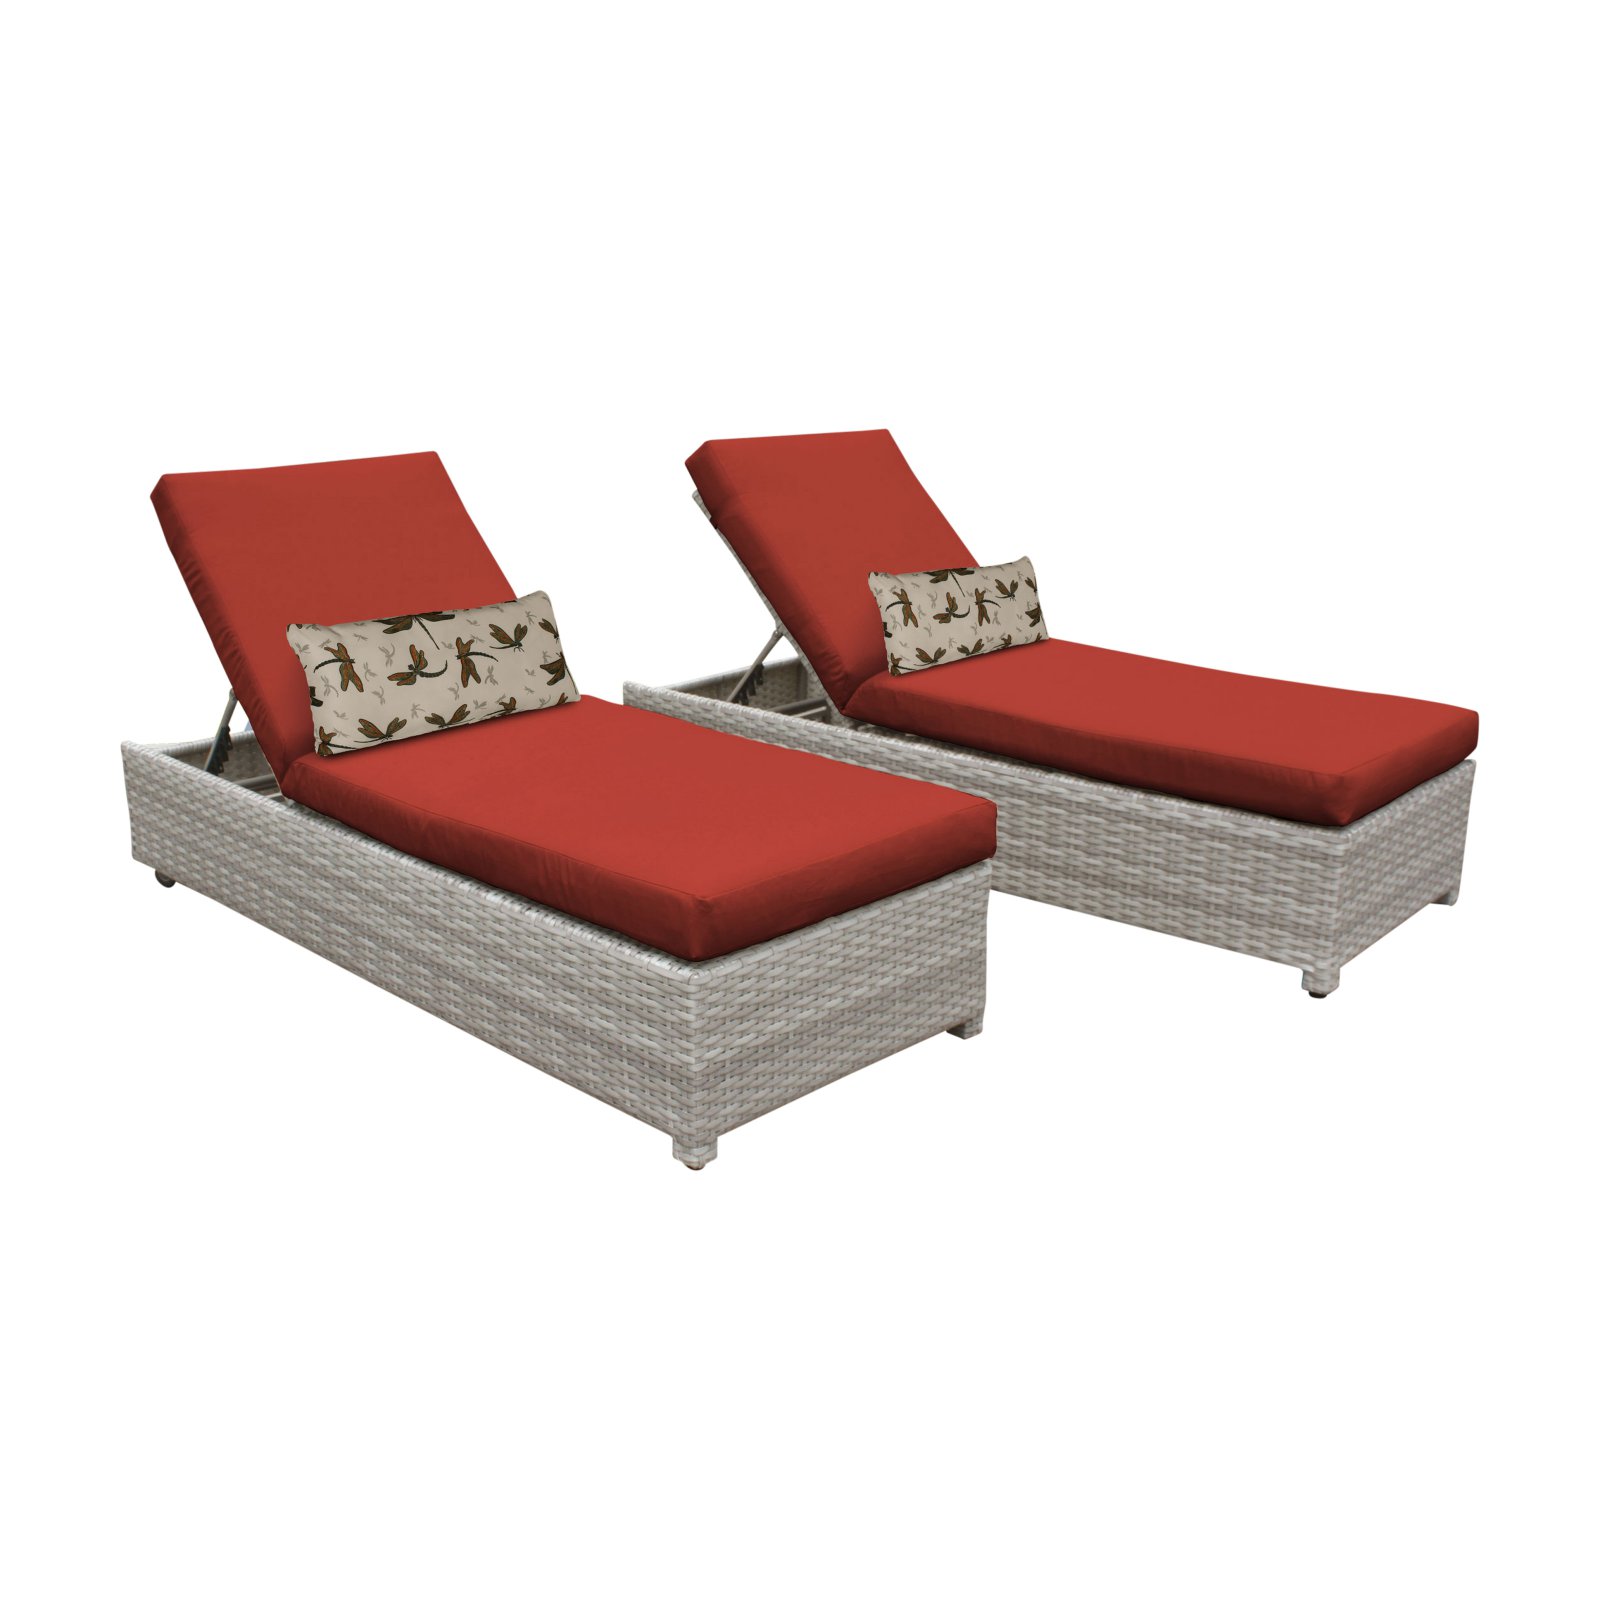 TK Classics Fairmont Wheeled Wicker Outdoor Chaise Lounge Chair - Set of 2 - image 1 of 11